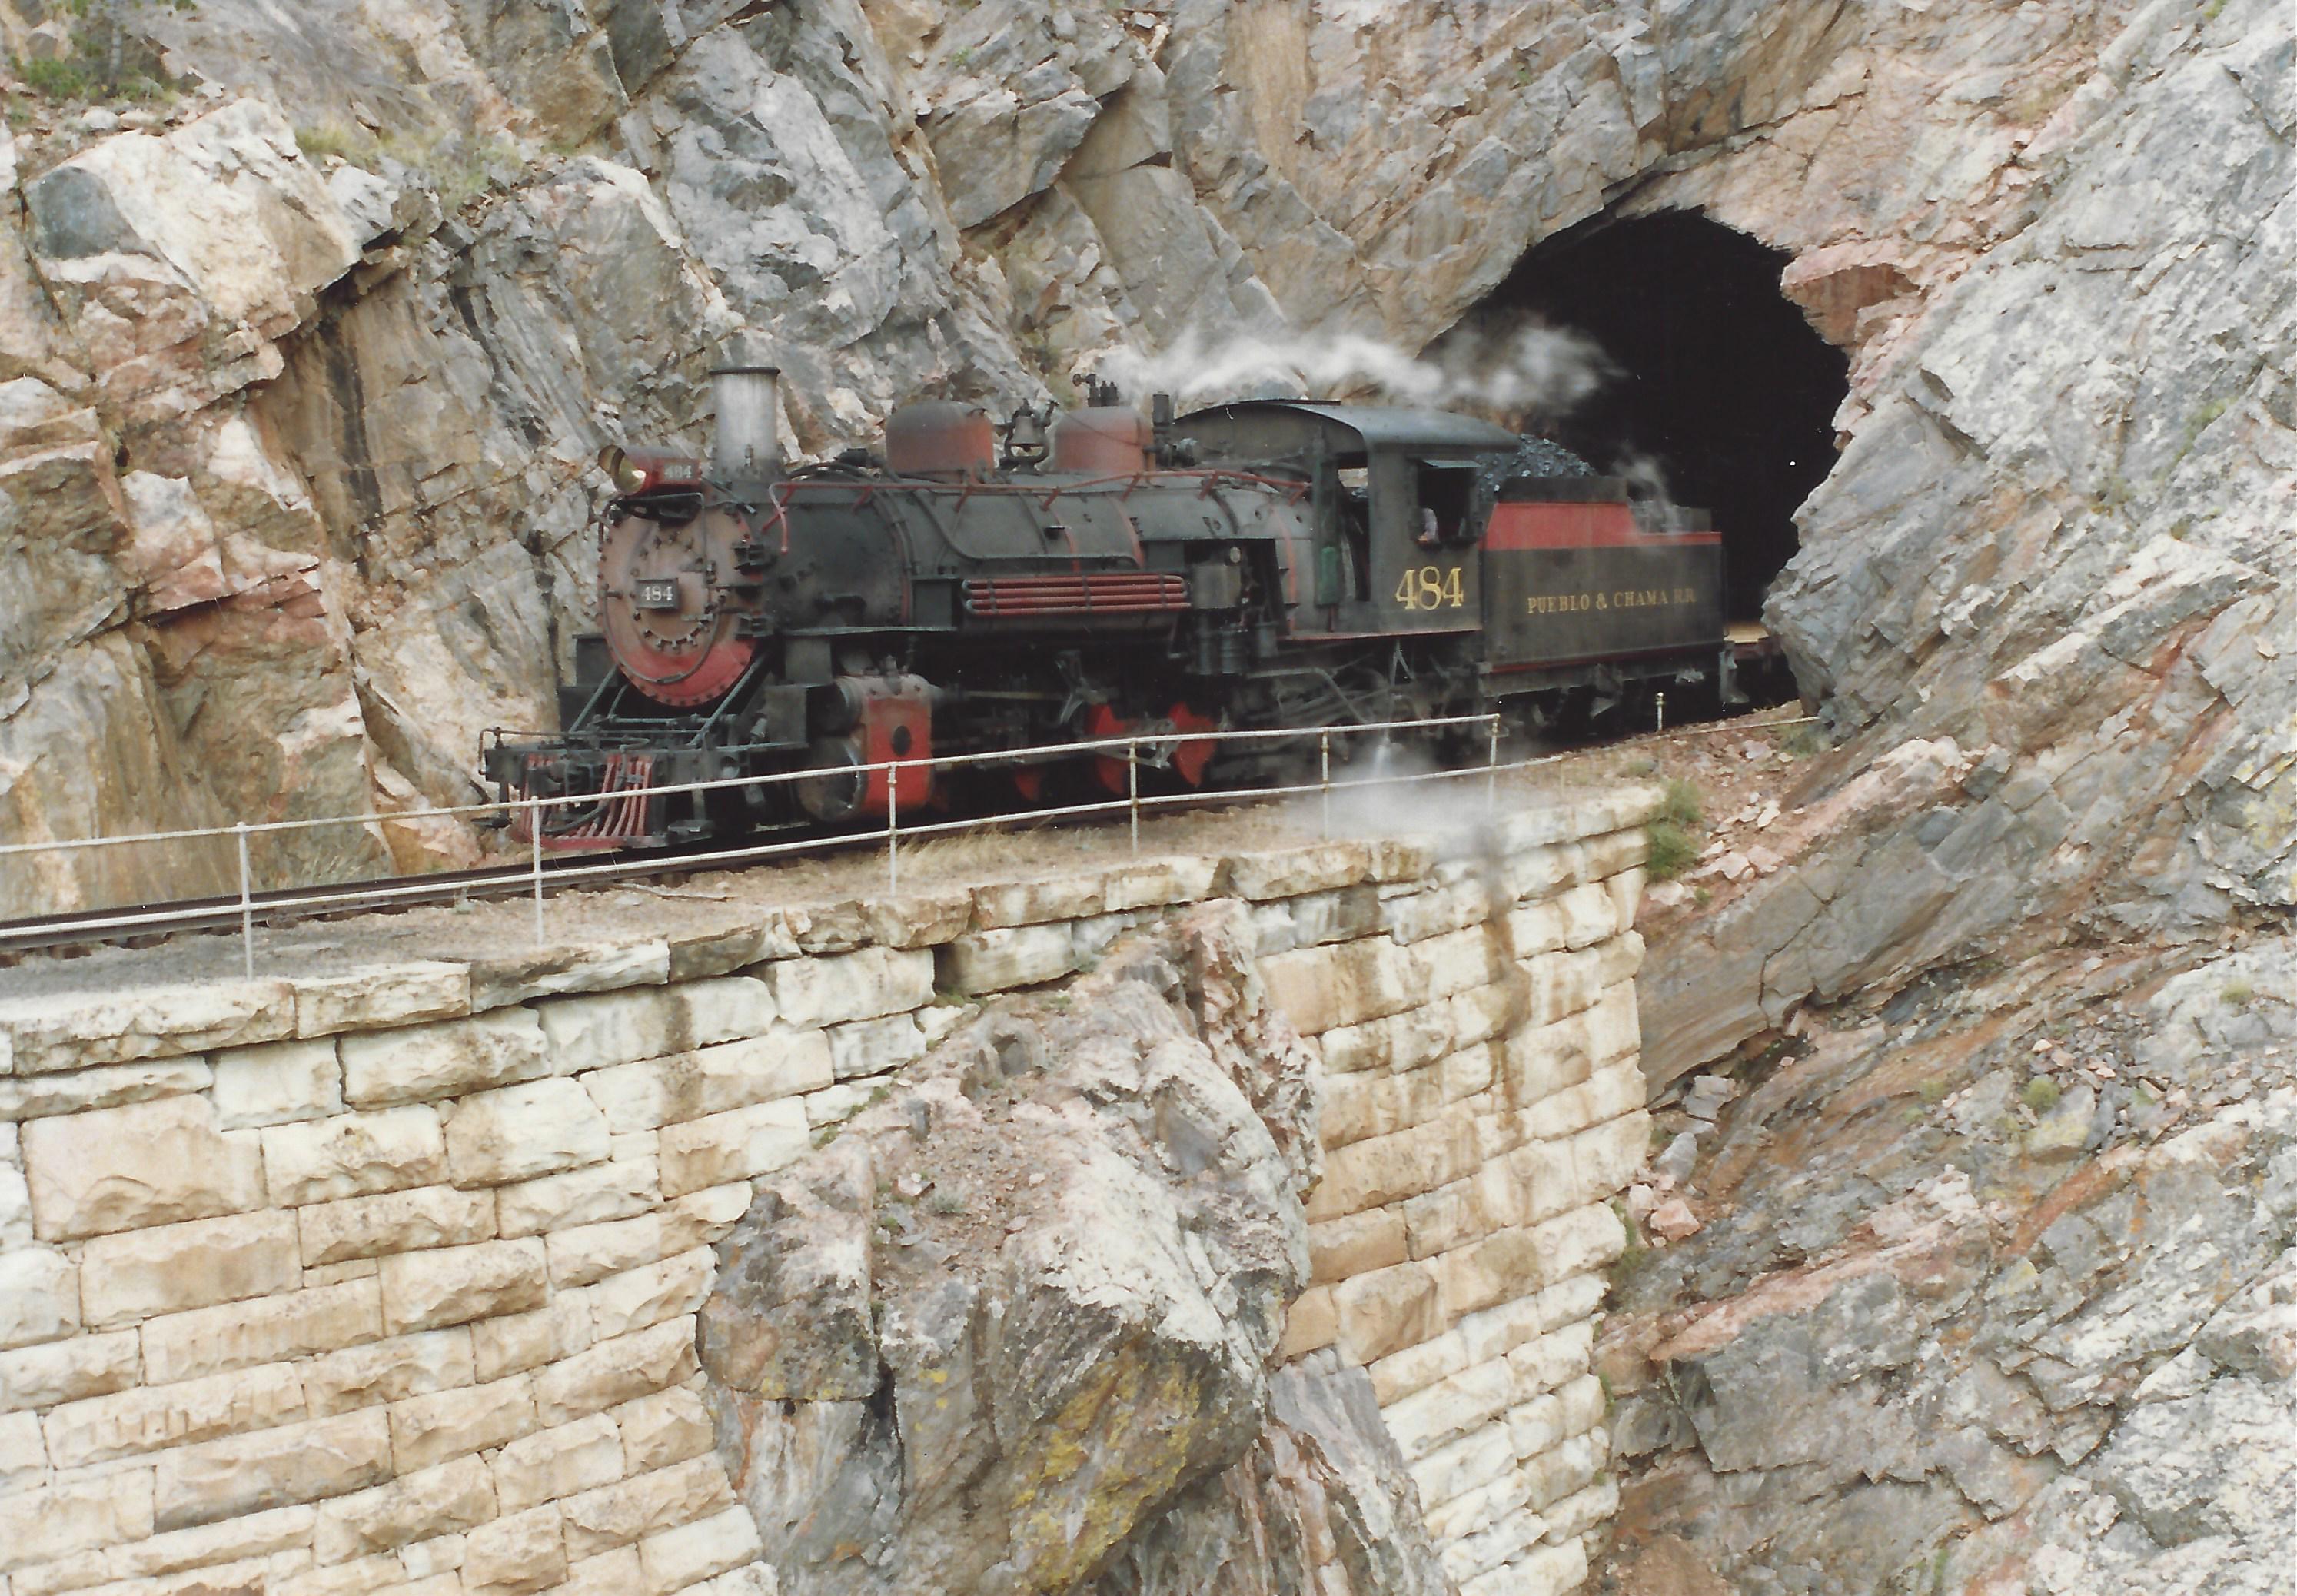 DRGW 484 Pueblo and Chama Duffy Circus Rock tunnel.jpg